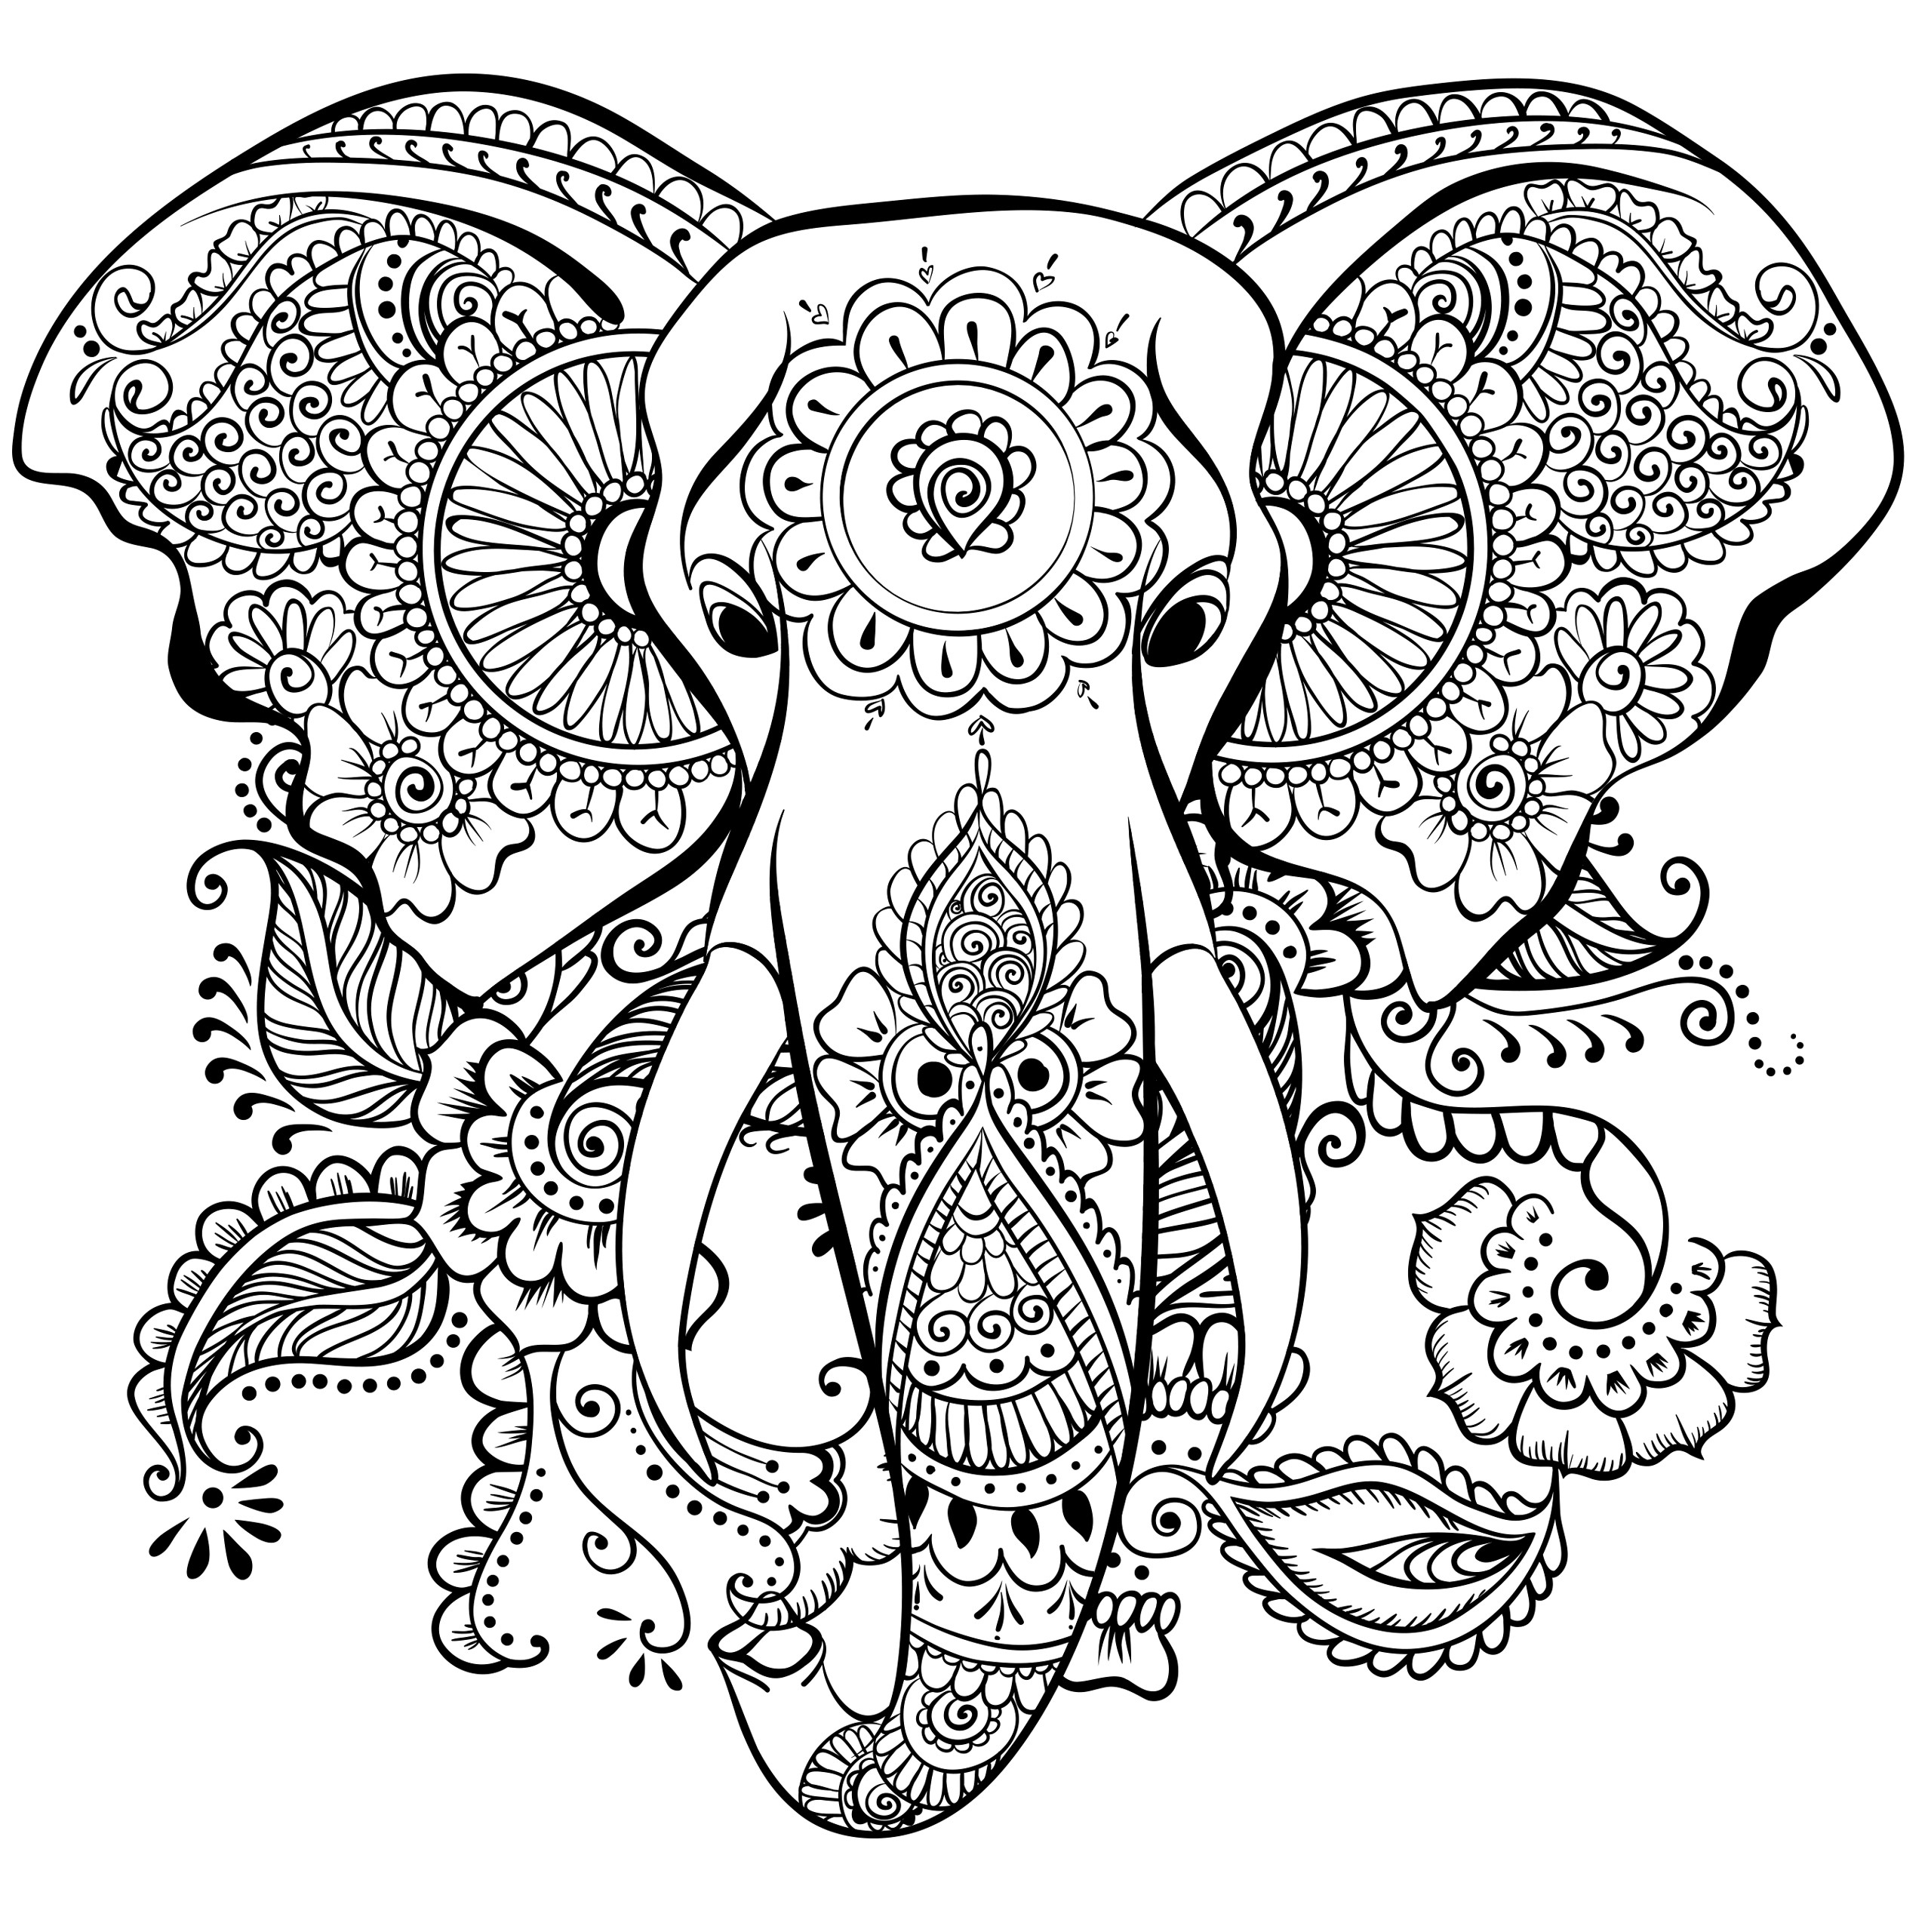 Elephant Adult Coloring Pages
 63 Adult Coloring Pages To Nourish Your Mental Visual